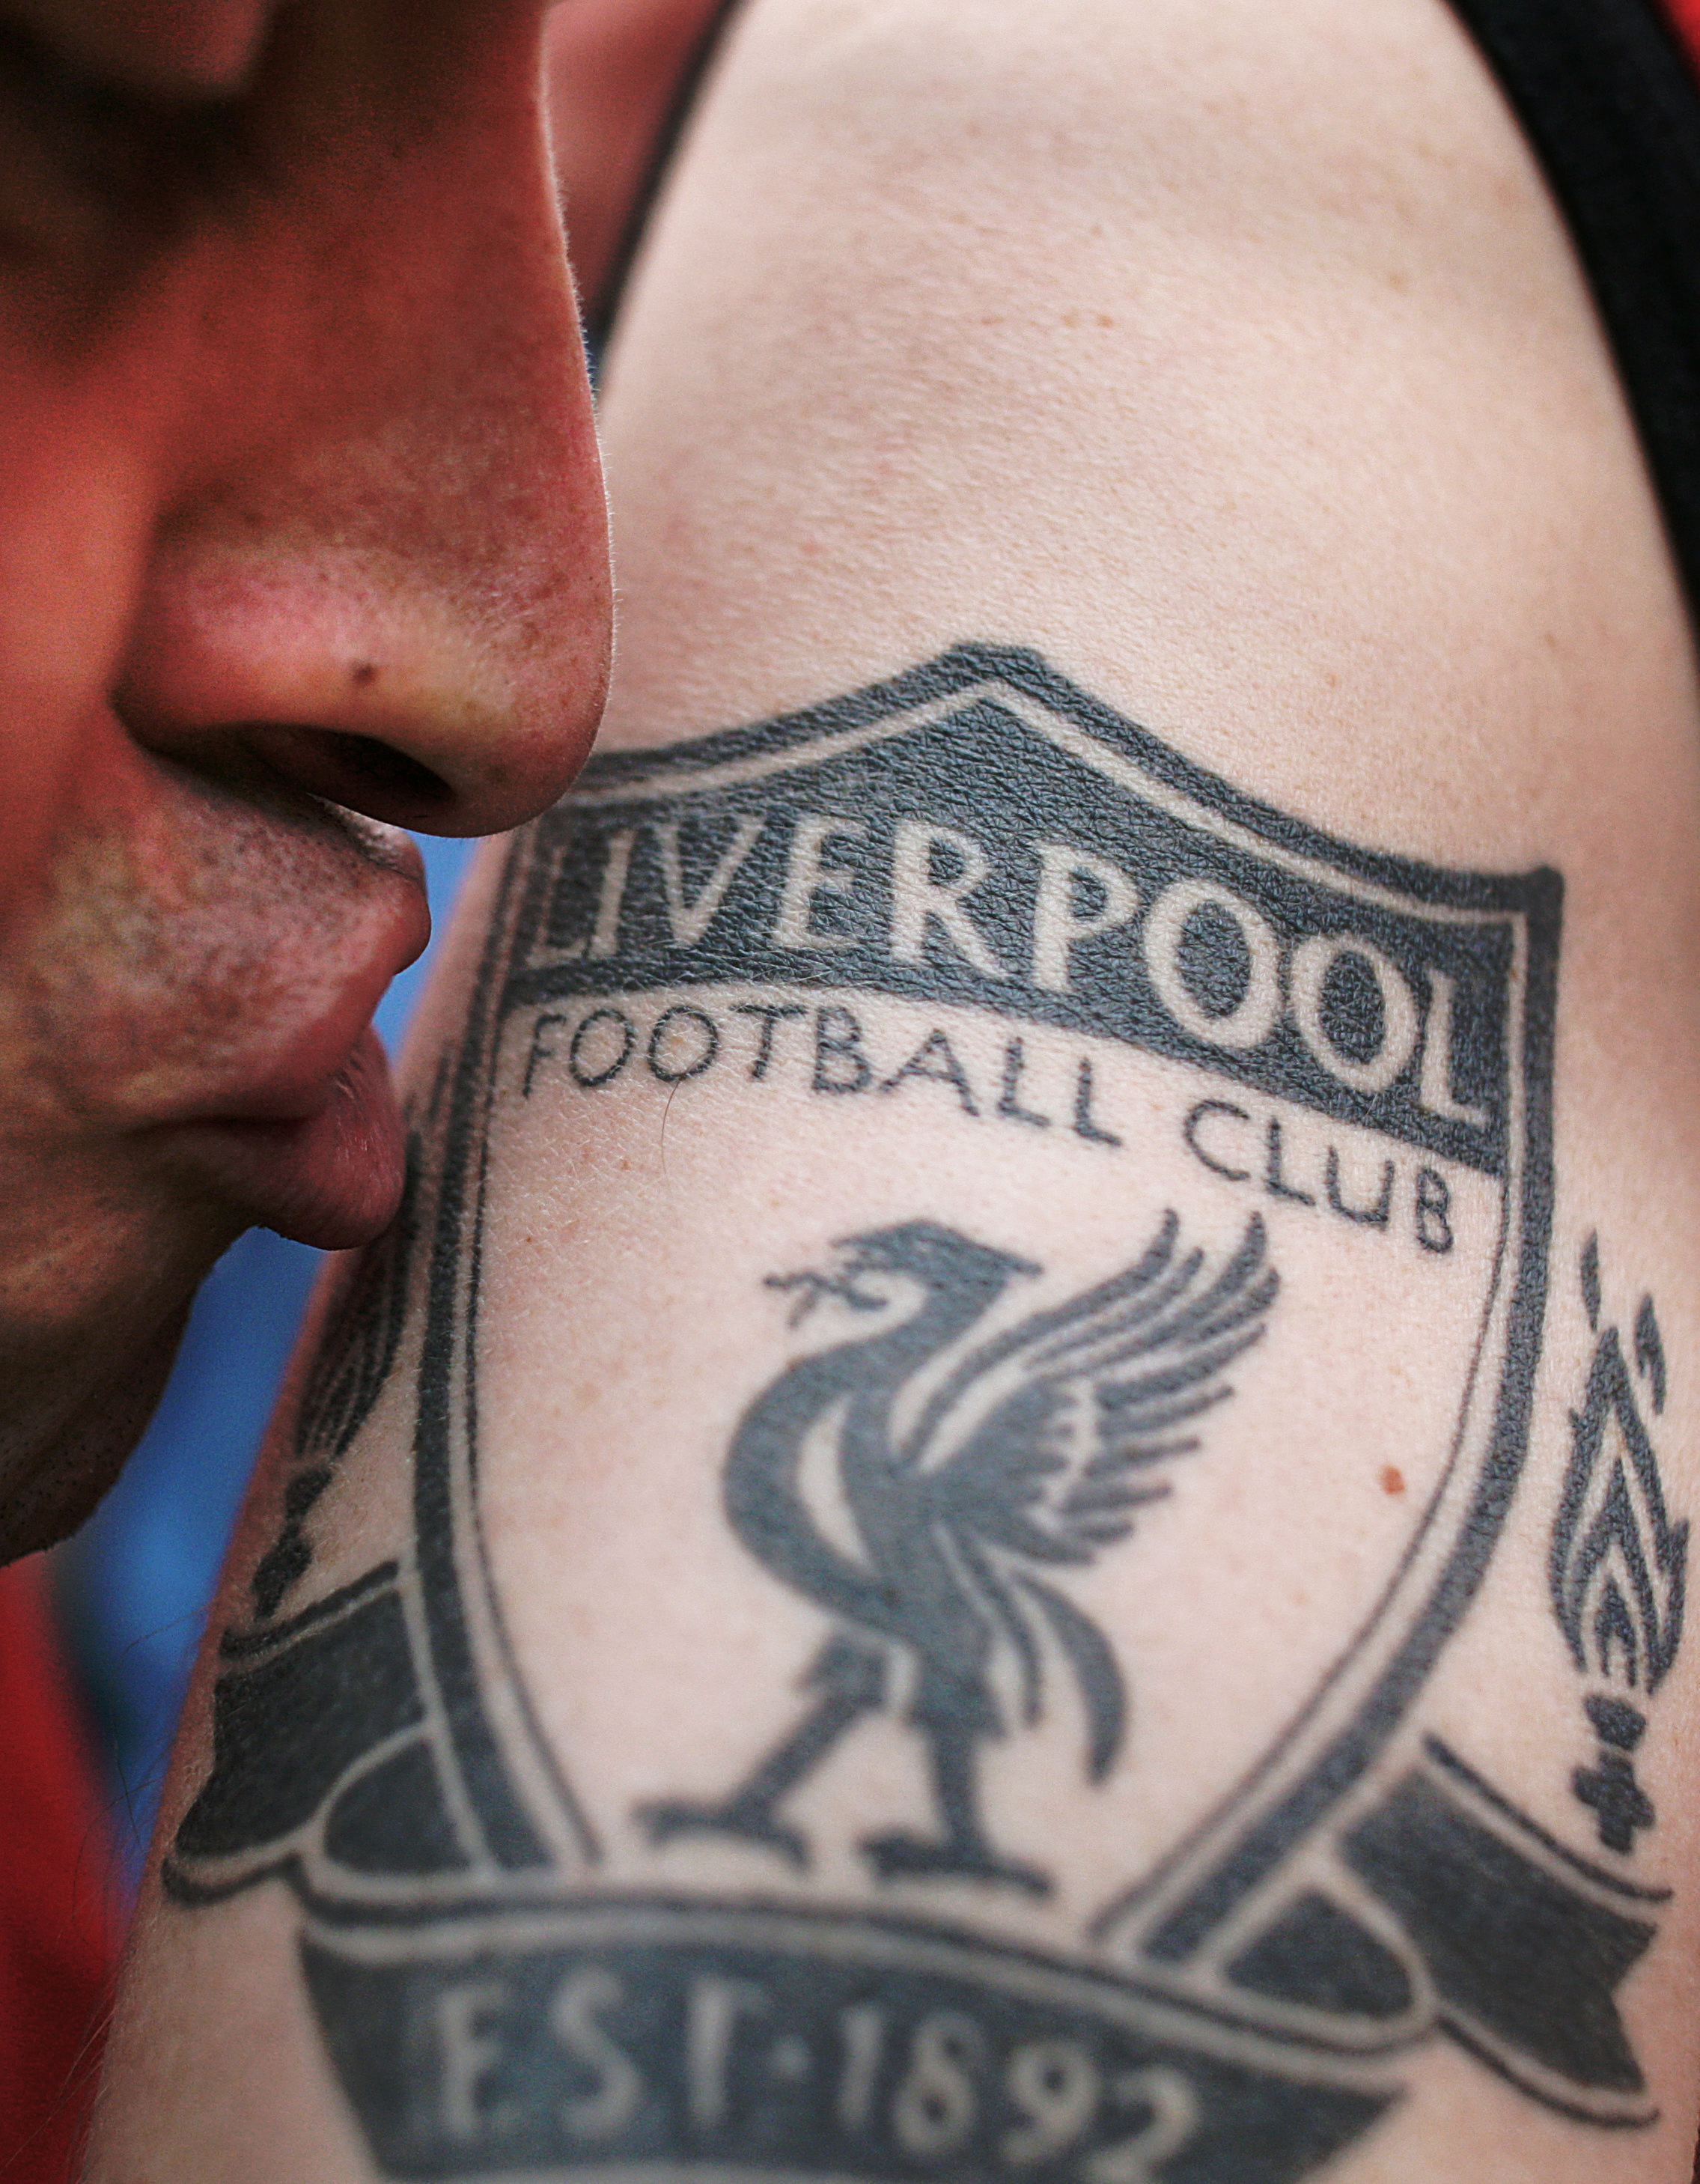 A Liverpool fan kisses a tattoo with the Liverpool soccer club's emblem outside a pub before the Champions League final match between AC Milan and Liverpool on May 24, 2005 in Istanbul.